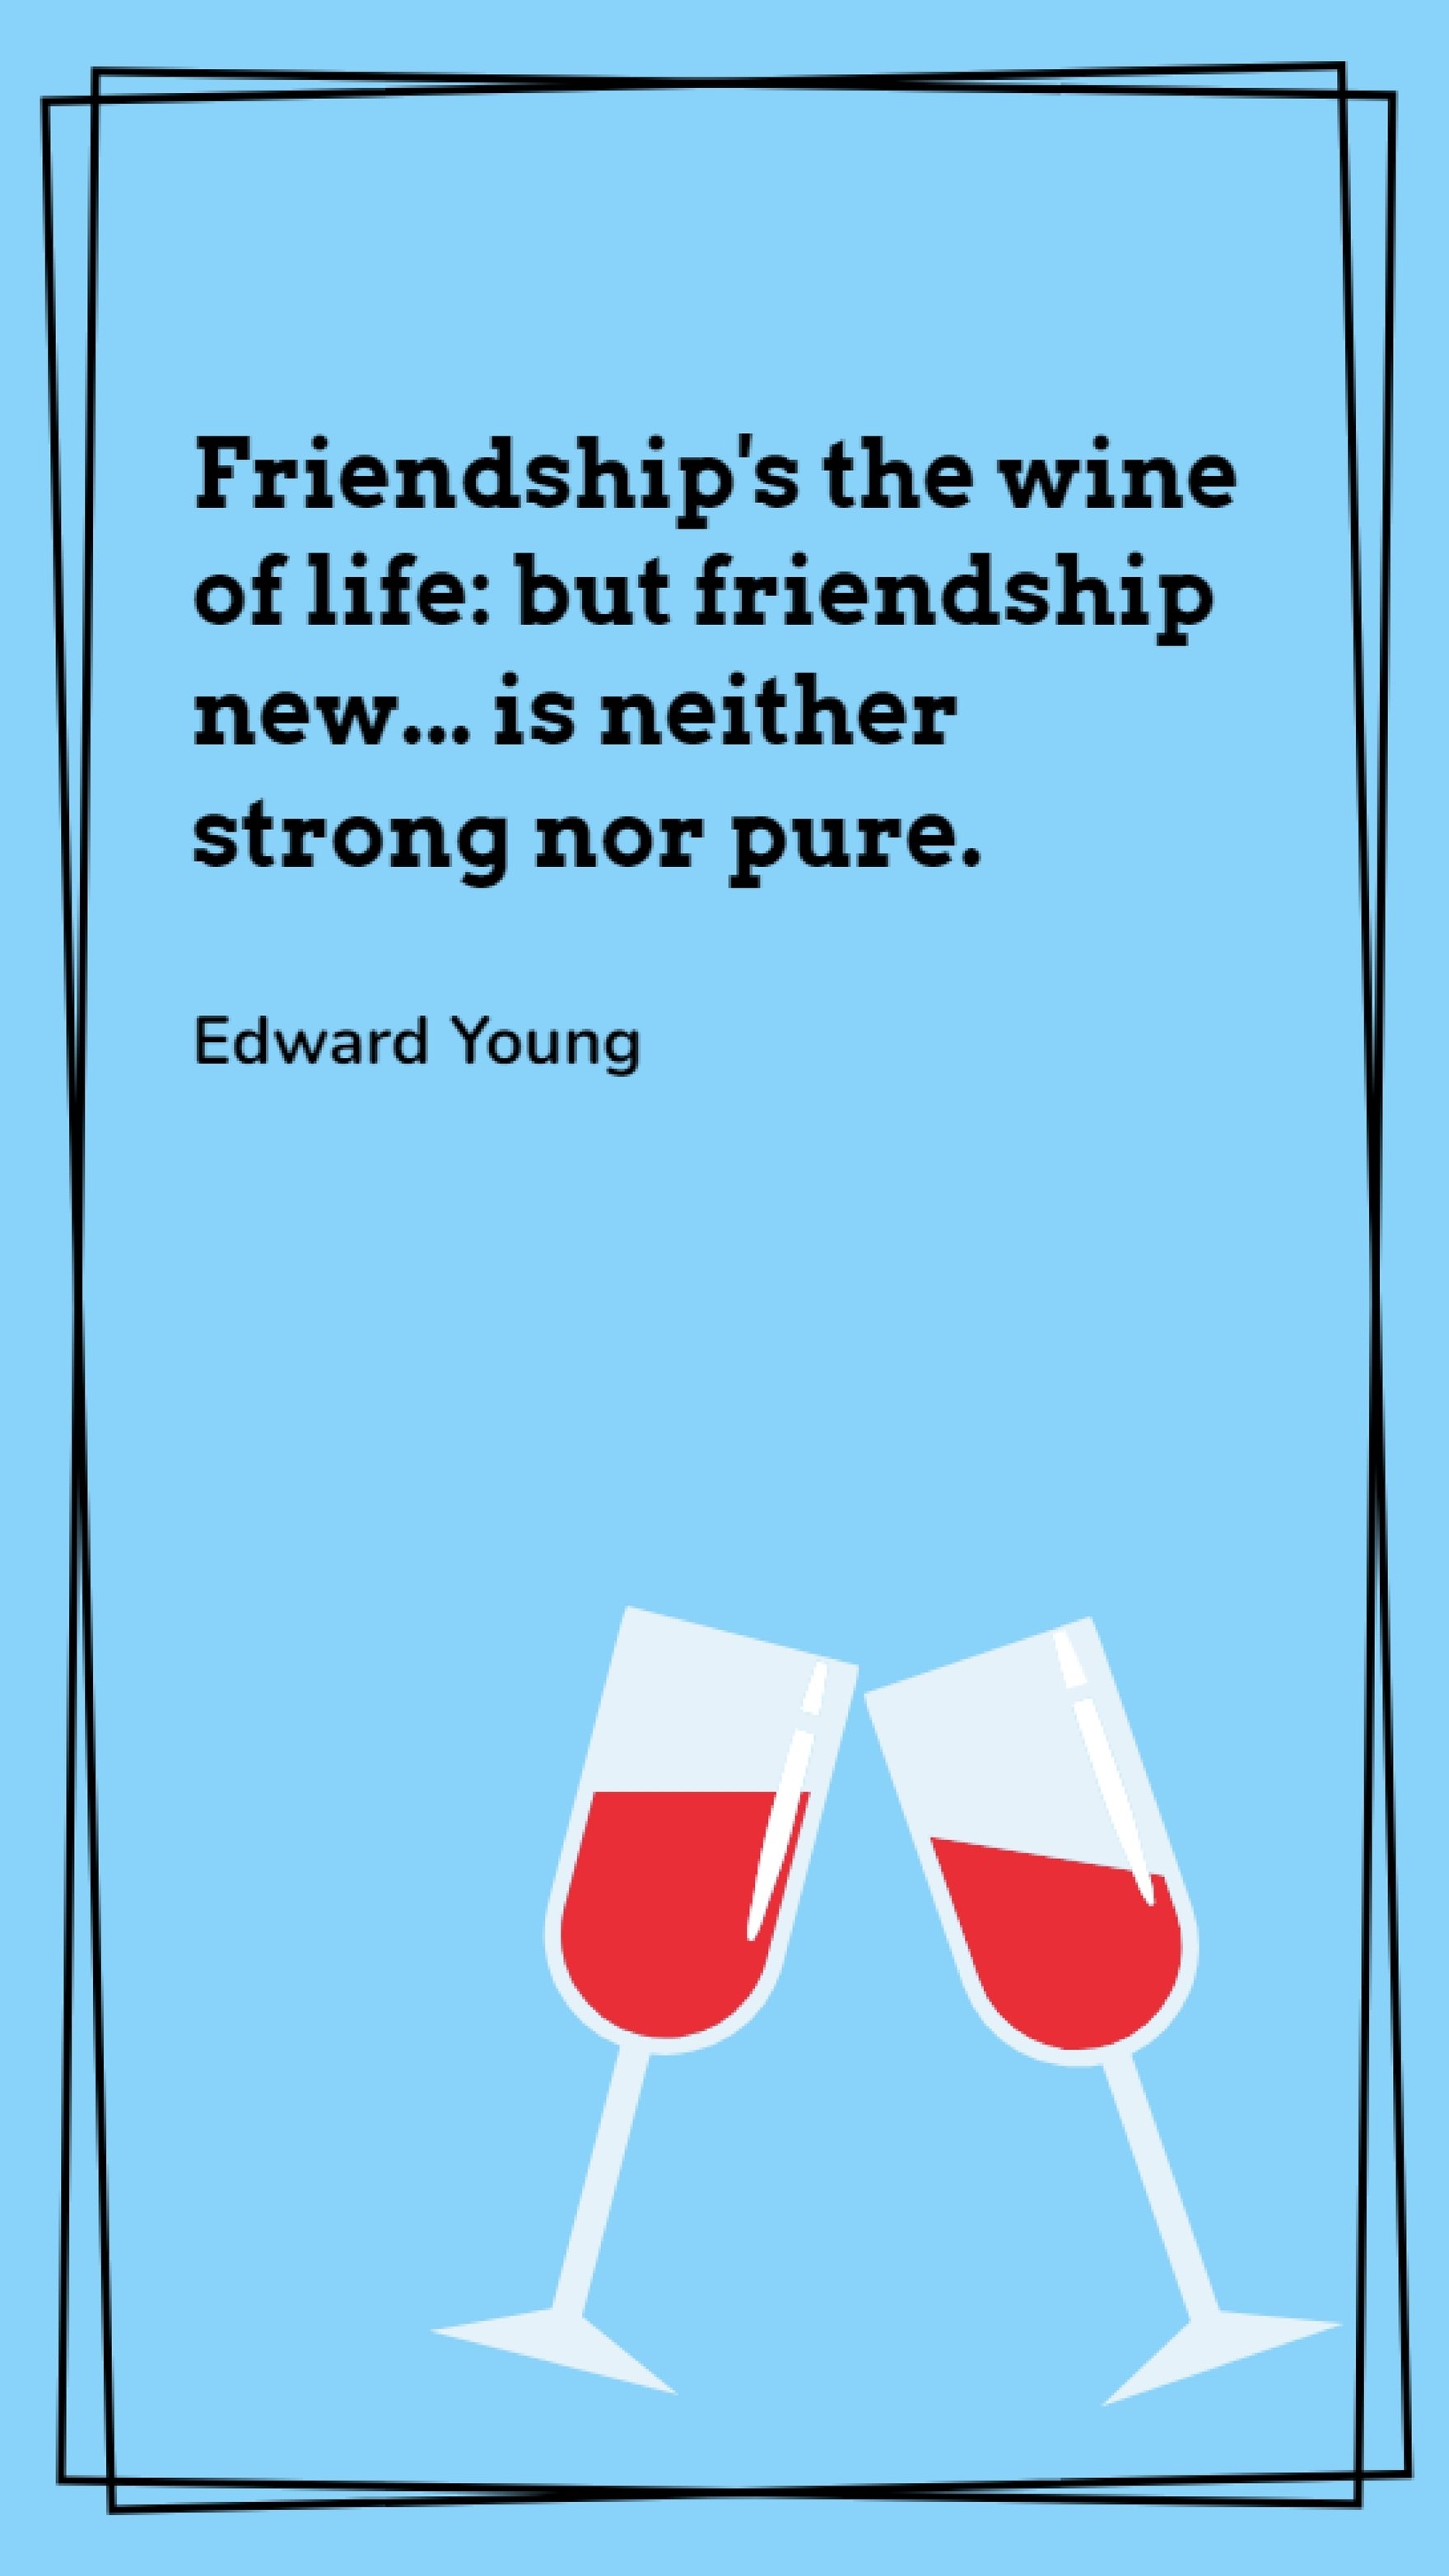 Edward Young - Friendship's the wine of life: but friendship new... is neither strong nor pure. Template